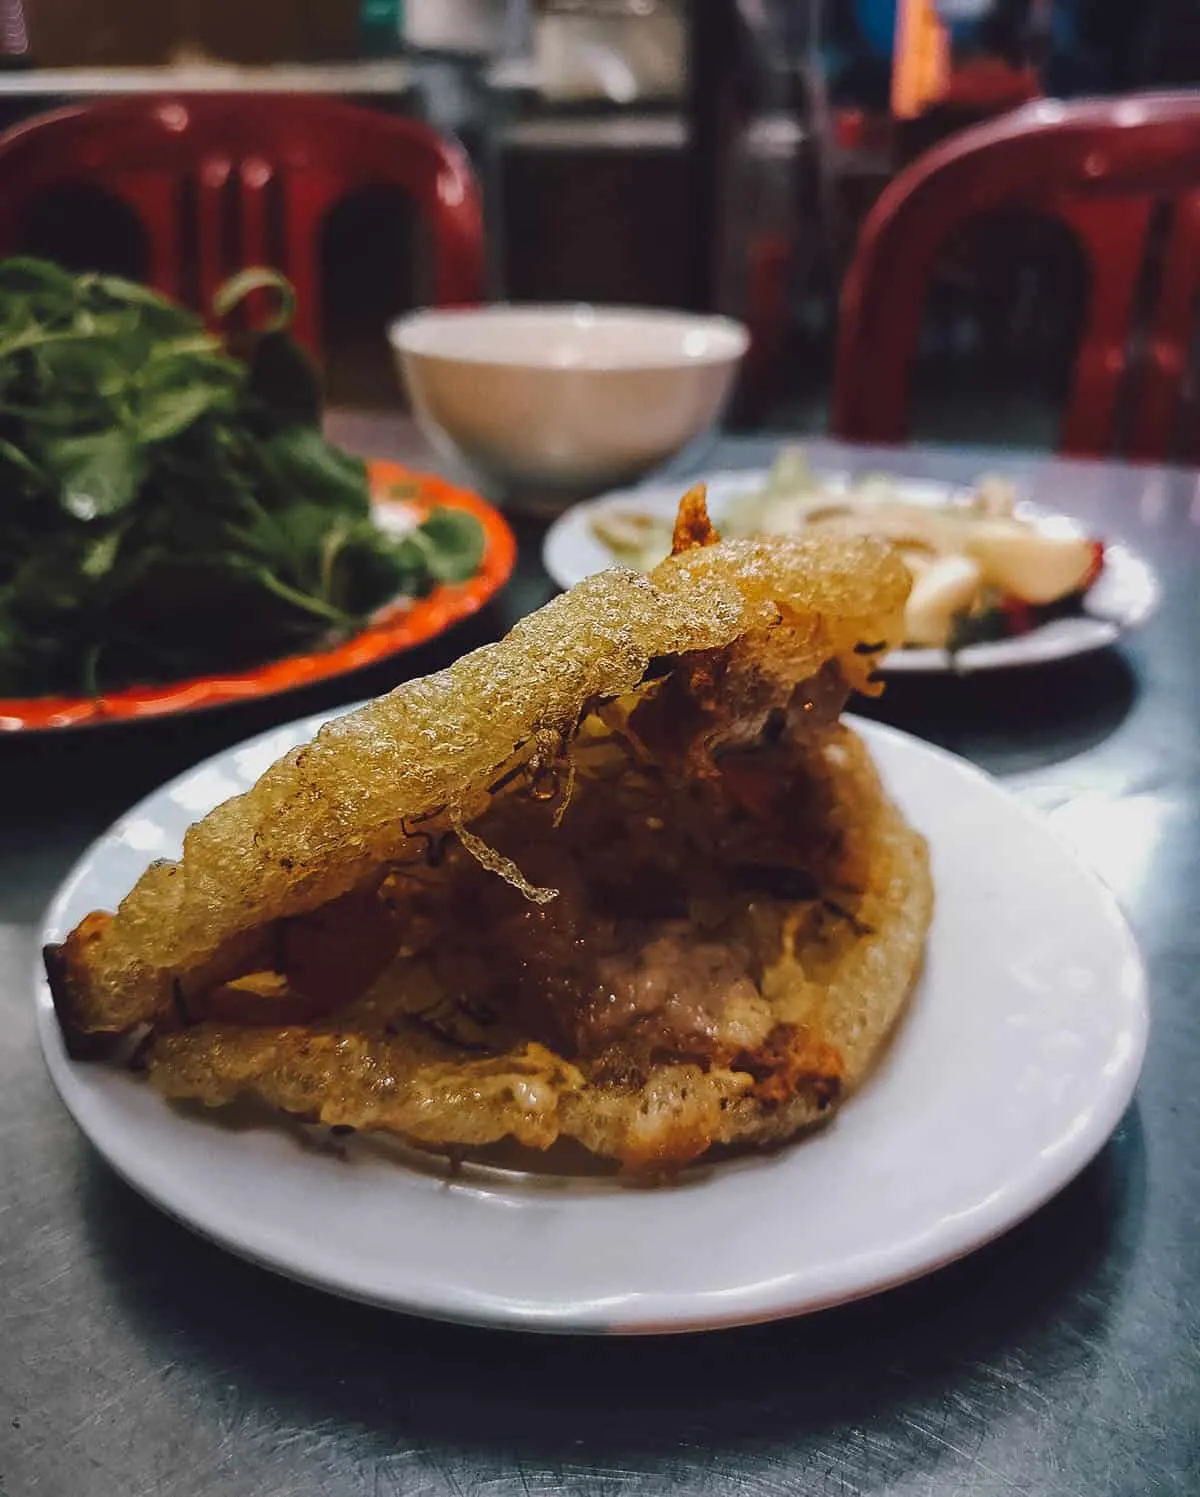 Banh khoai with fresh herbs and bean sprouts, a popular Vietnamese street food in Hue similar to bánh xèo